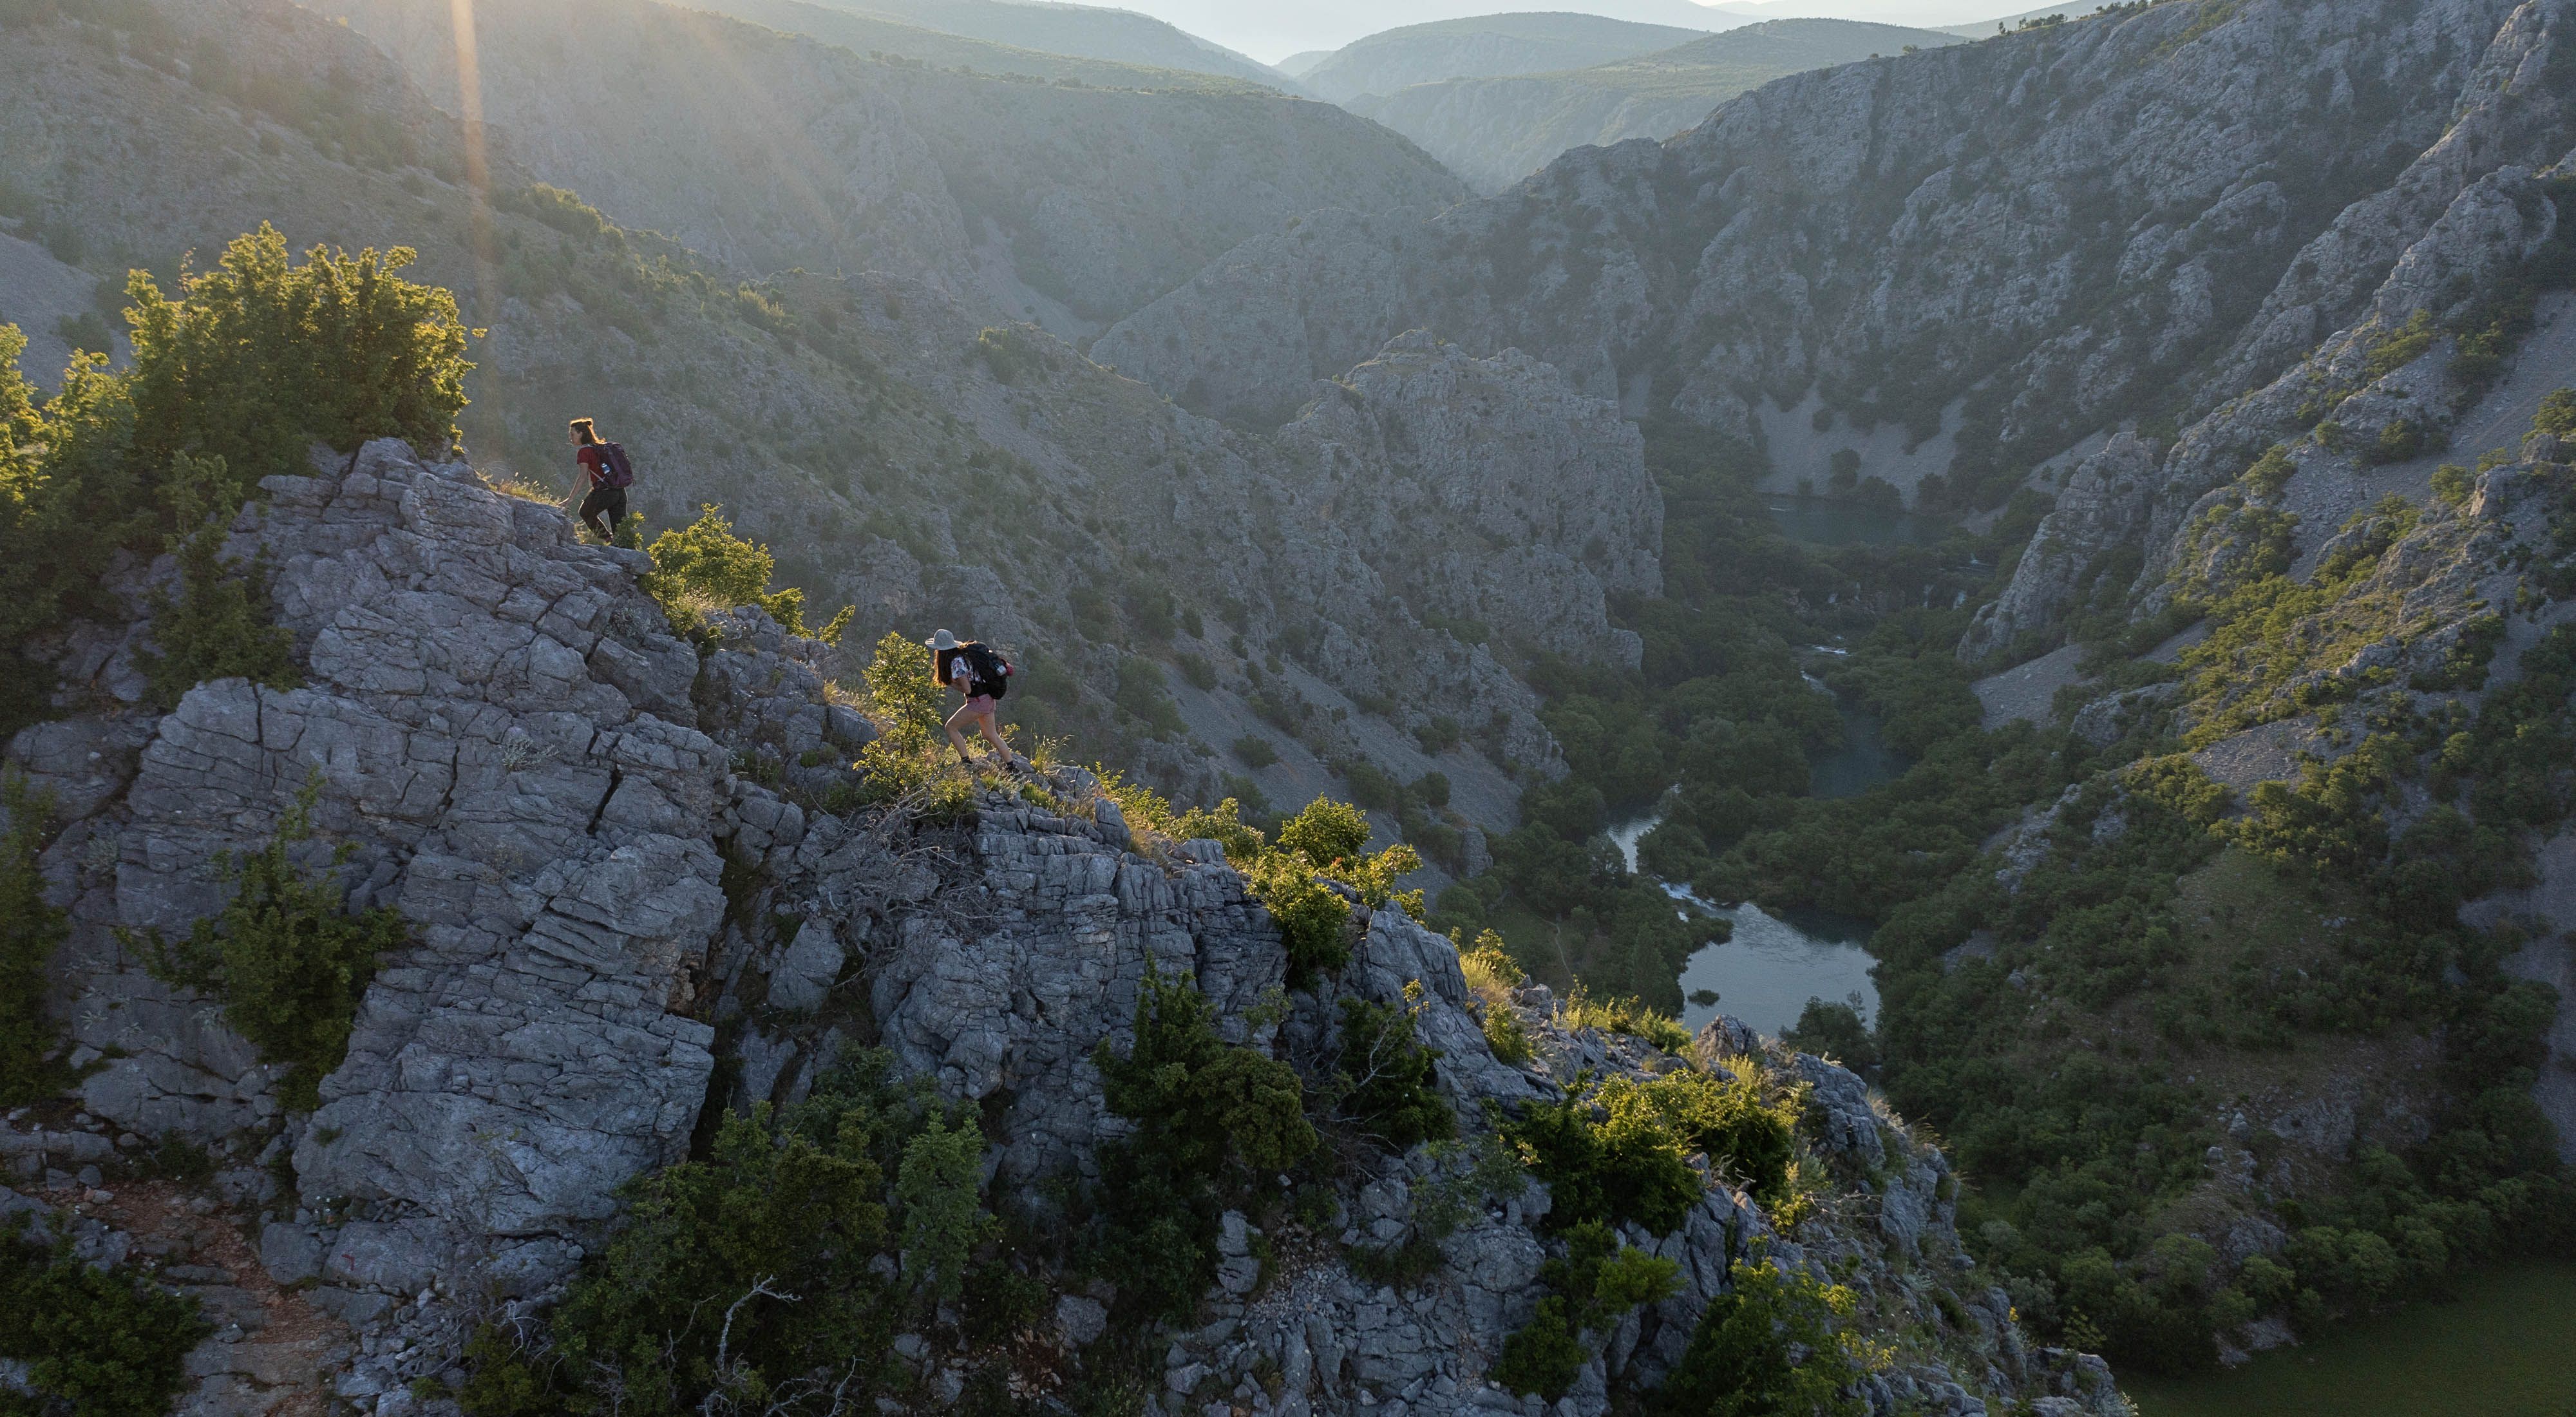 Hikers trek along a ridgeline above a limestone gorge with a river below.